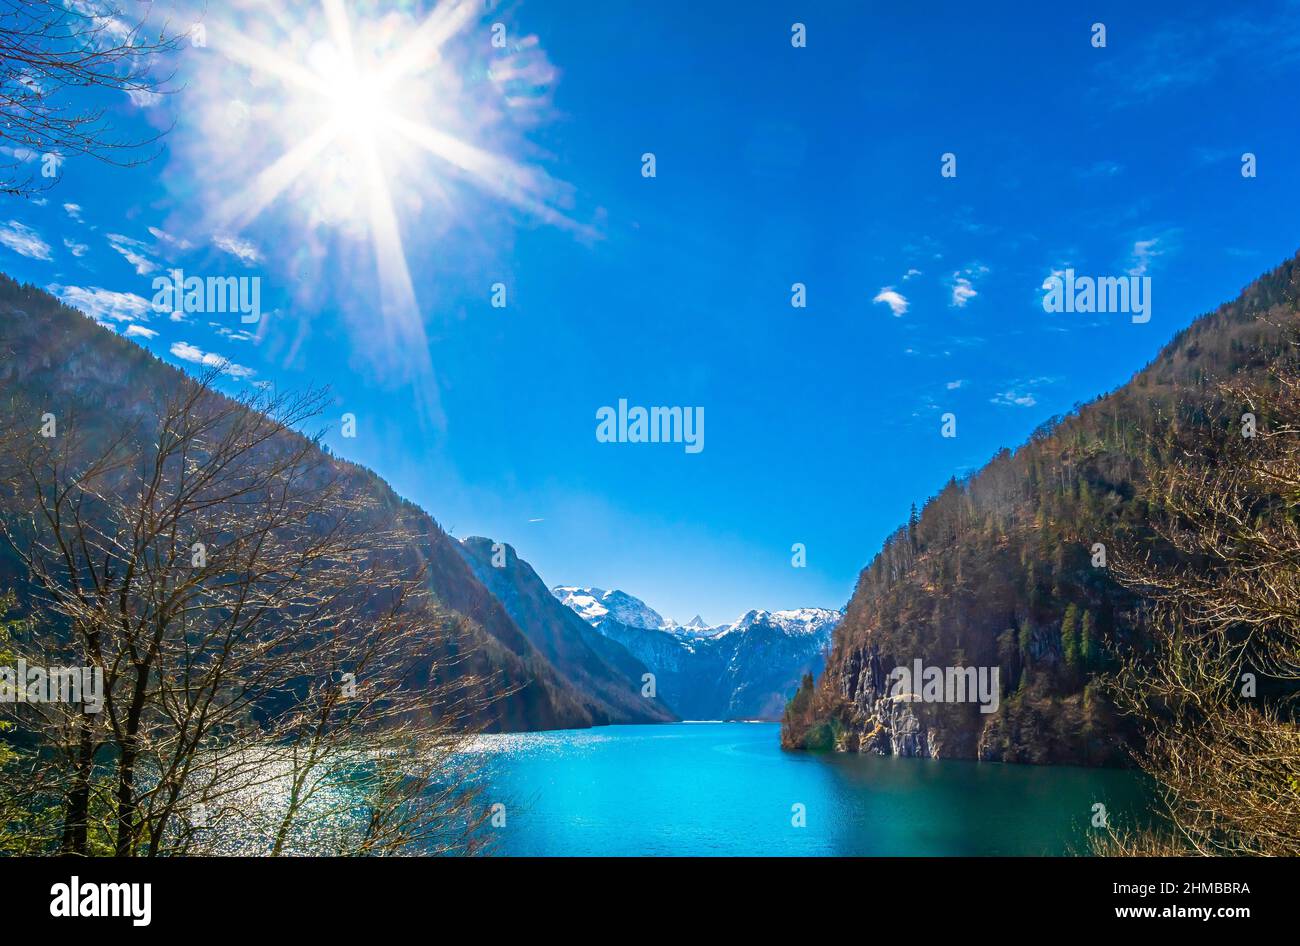 Majestic view of the Koenigssee between snow covered mountains at Berchtesgaden at winter Stock Photo